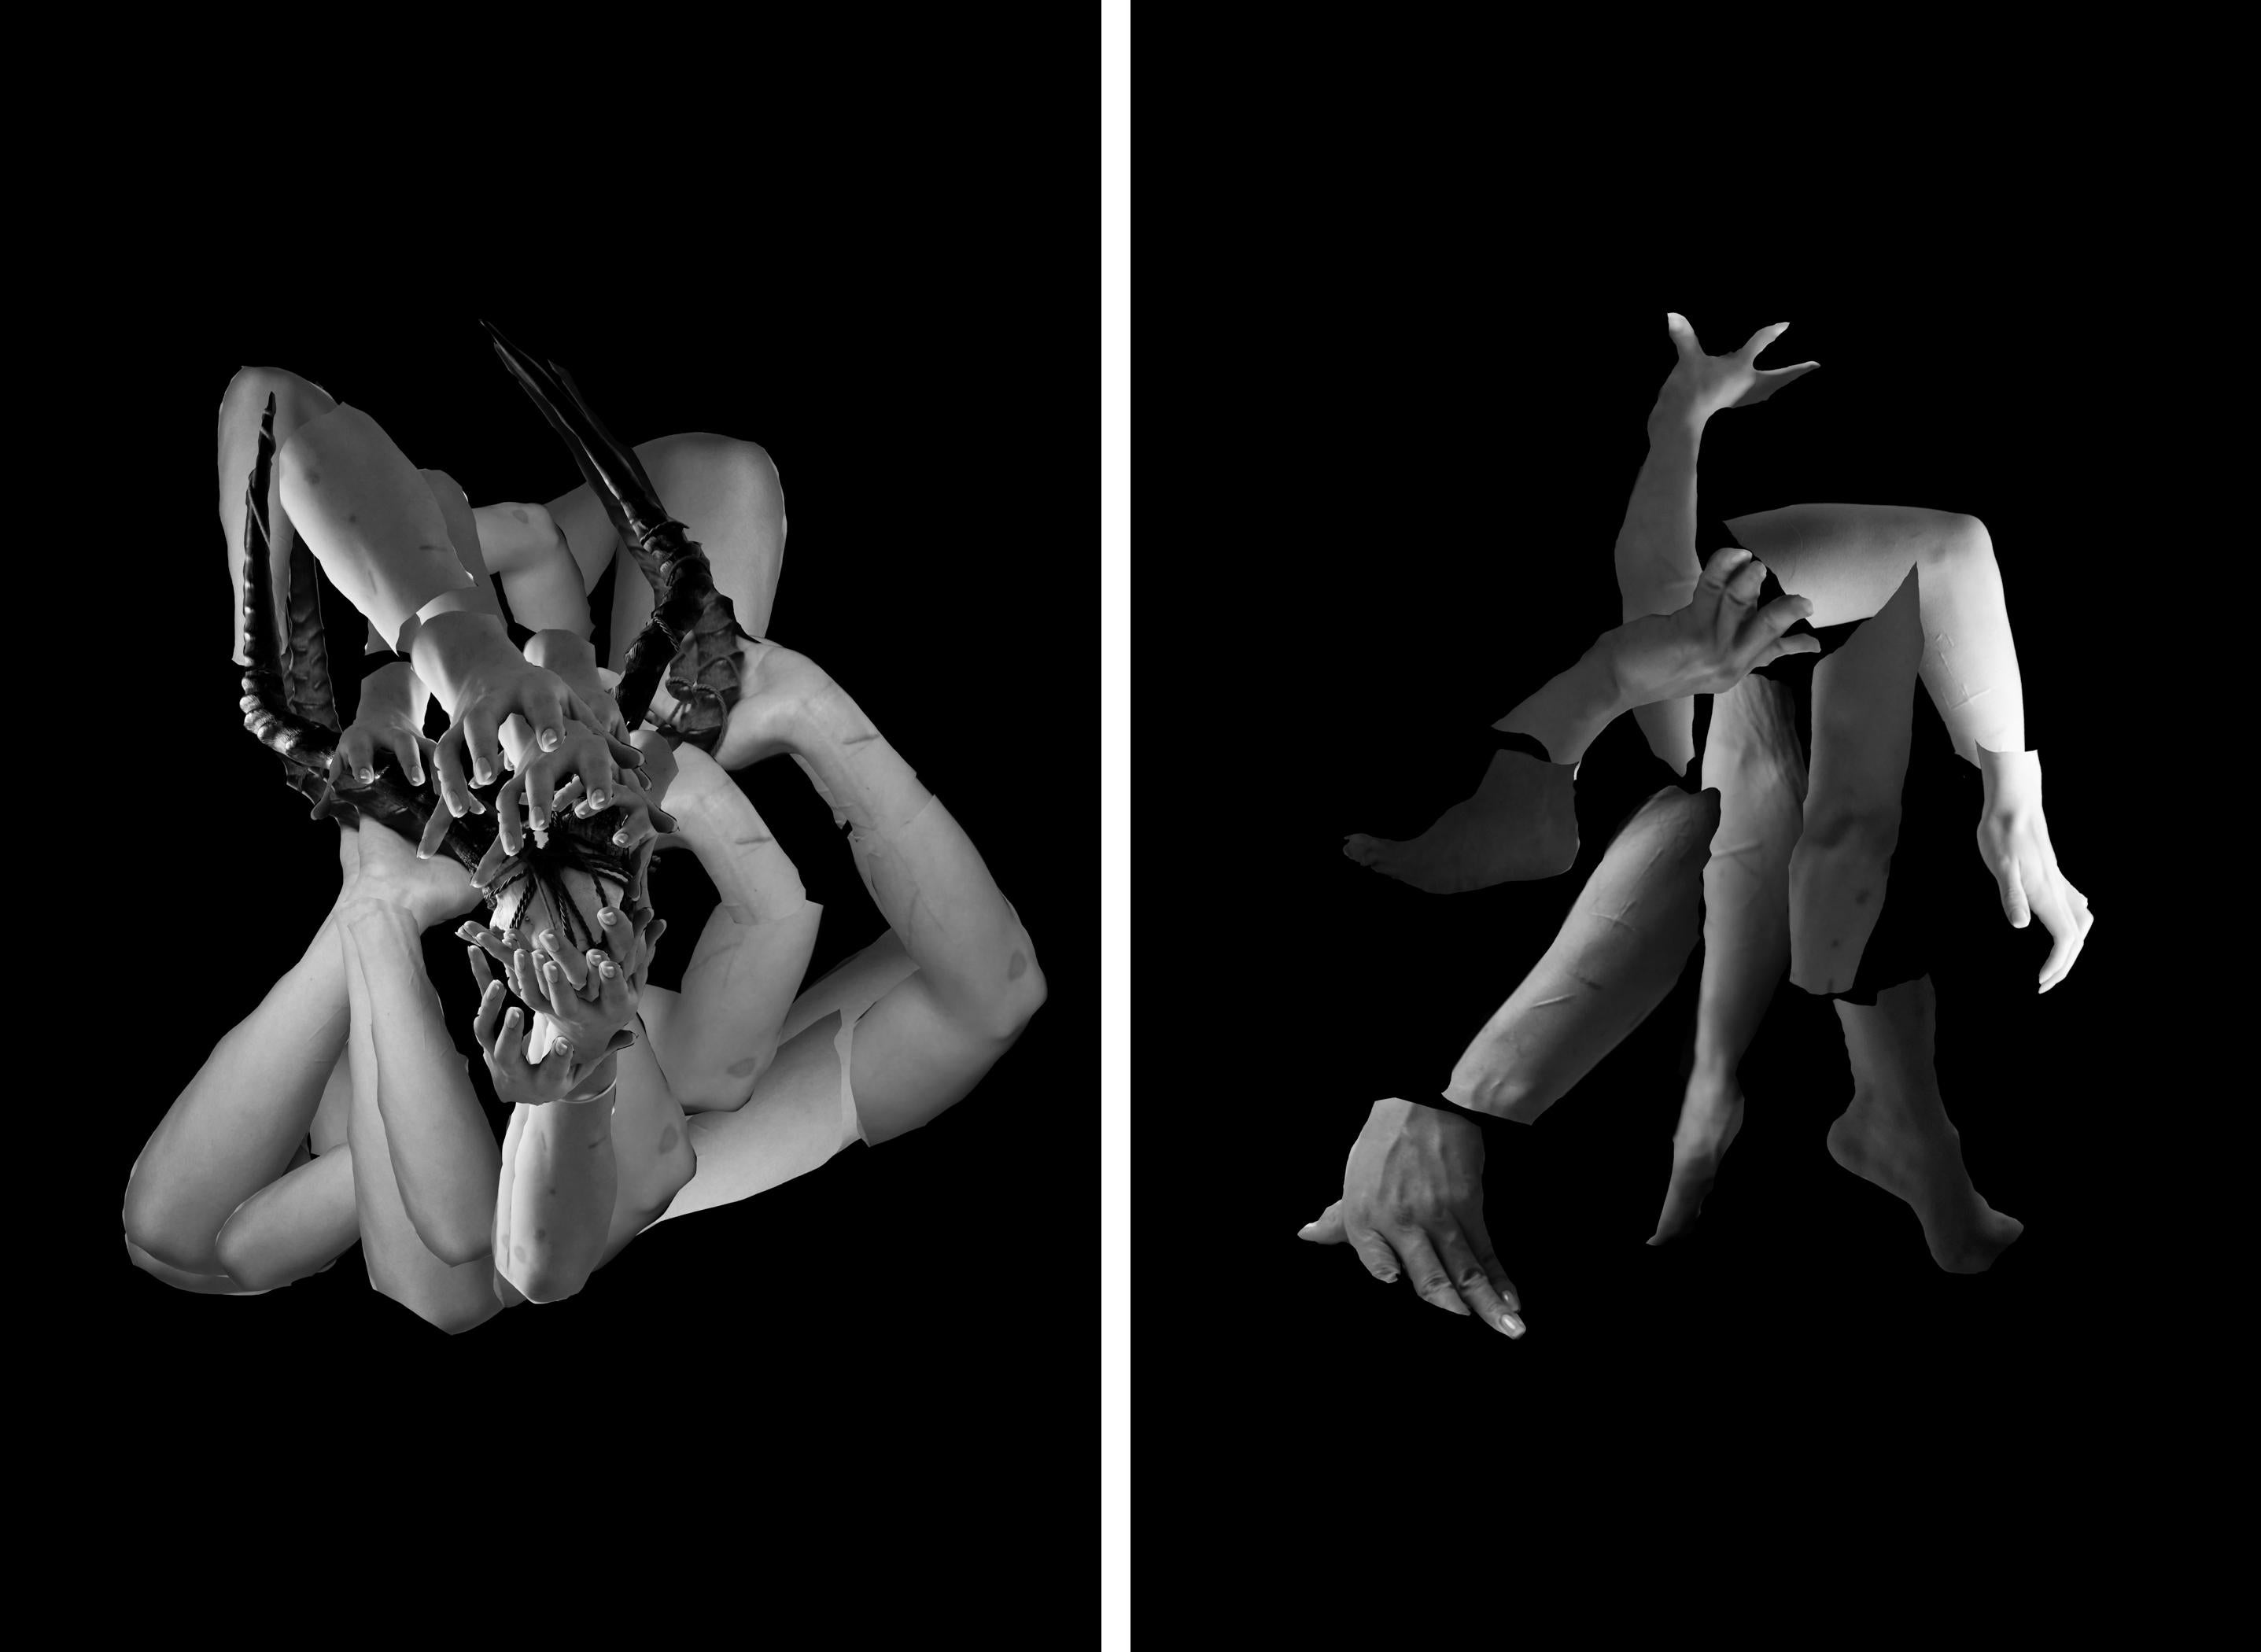 Ying Chen Figurative Photograph -  Untitled 3 & 5 Diptych photographs from the Fragmented series